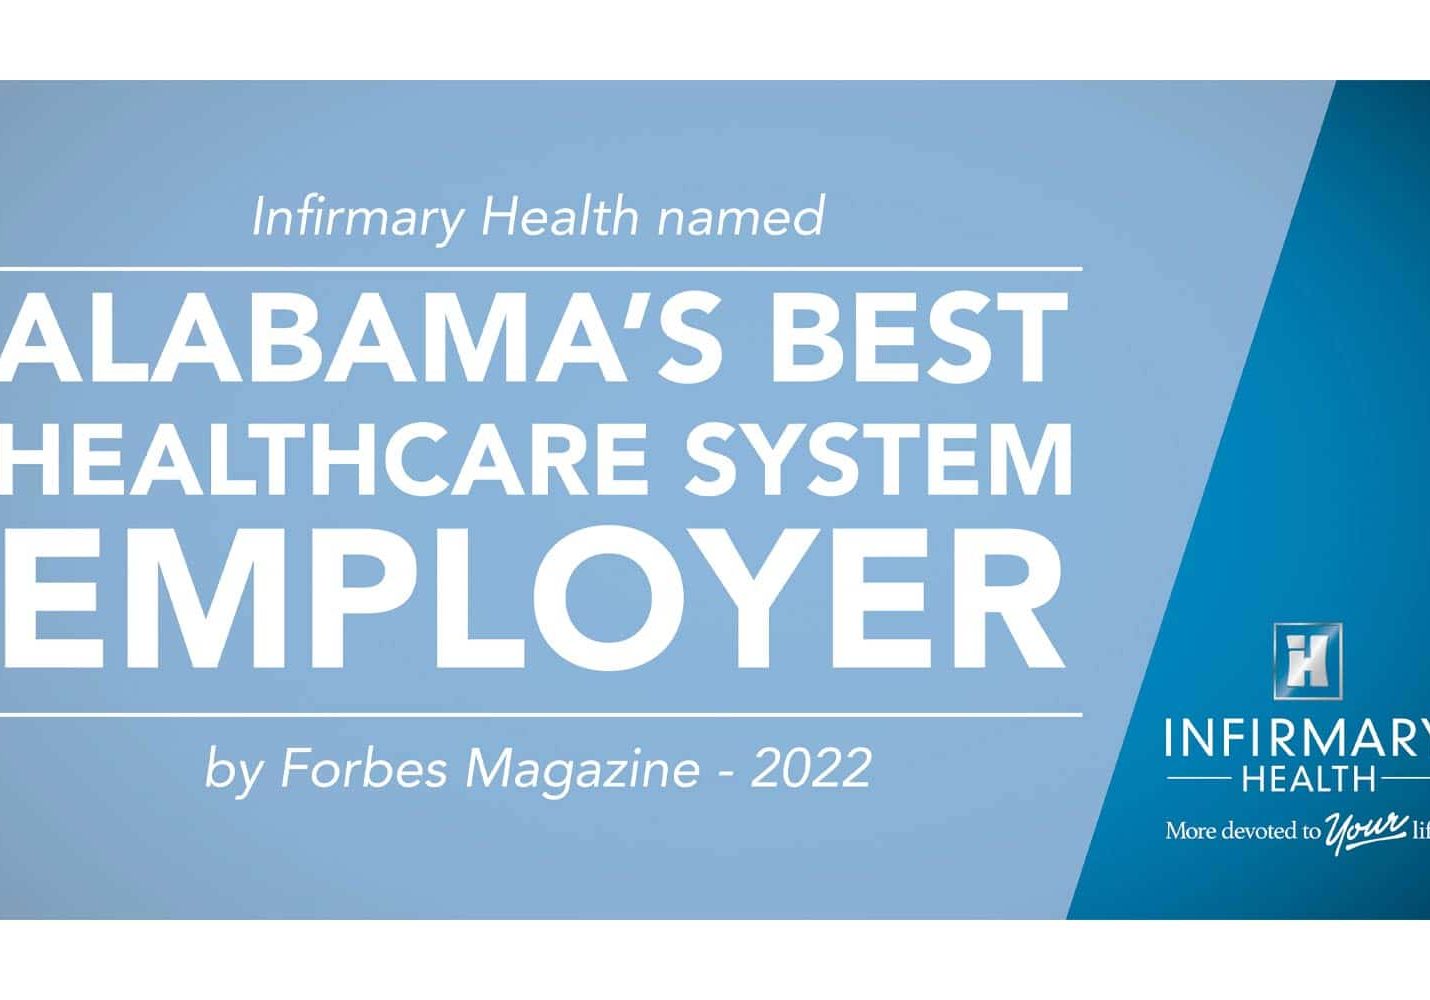 Infirmary Health Named To Forbes Top Alabama Employer List